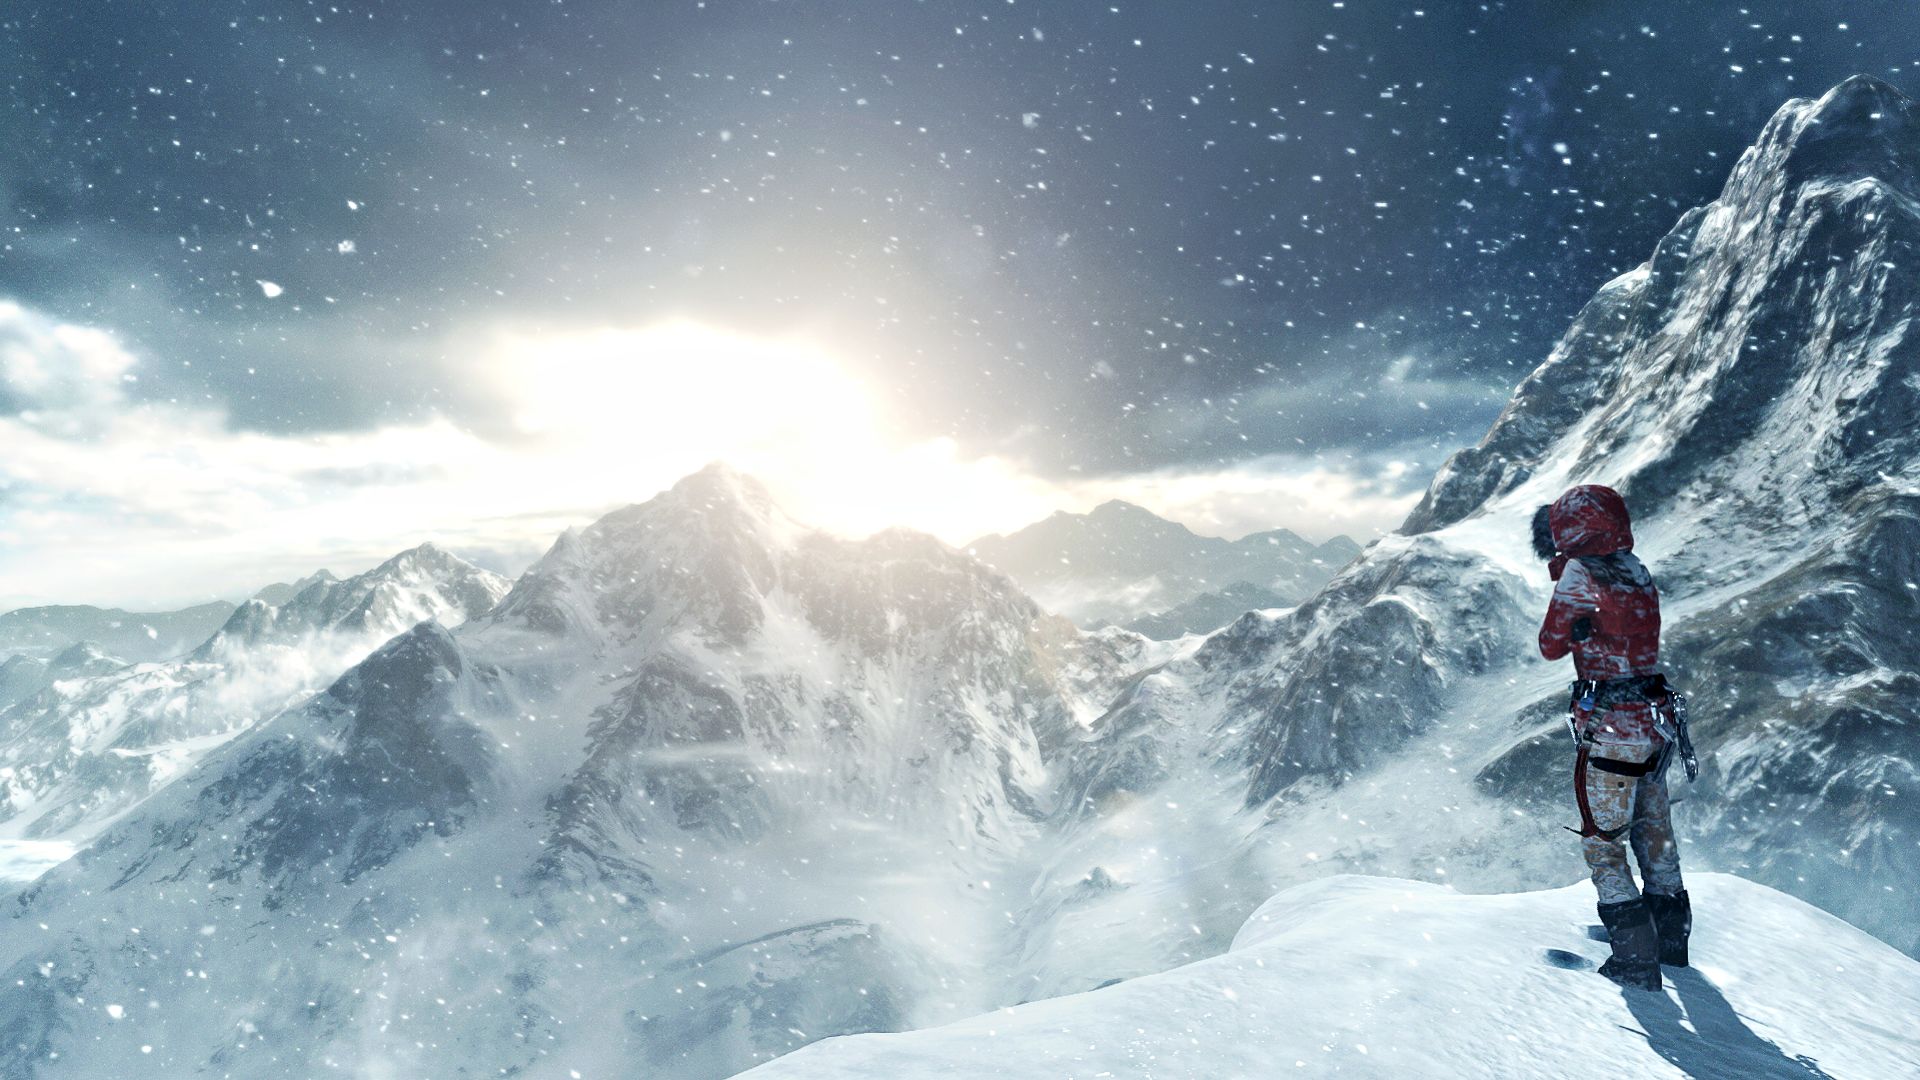  2015 By Stephen Comments Off on Rise of Tomb Raider HD Wallpapers